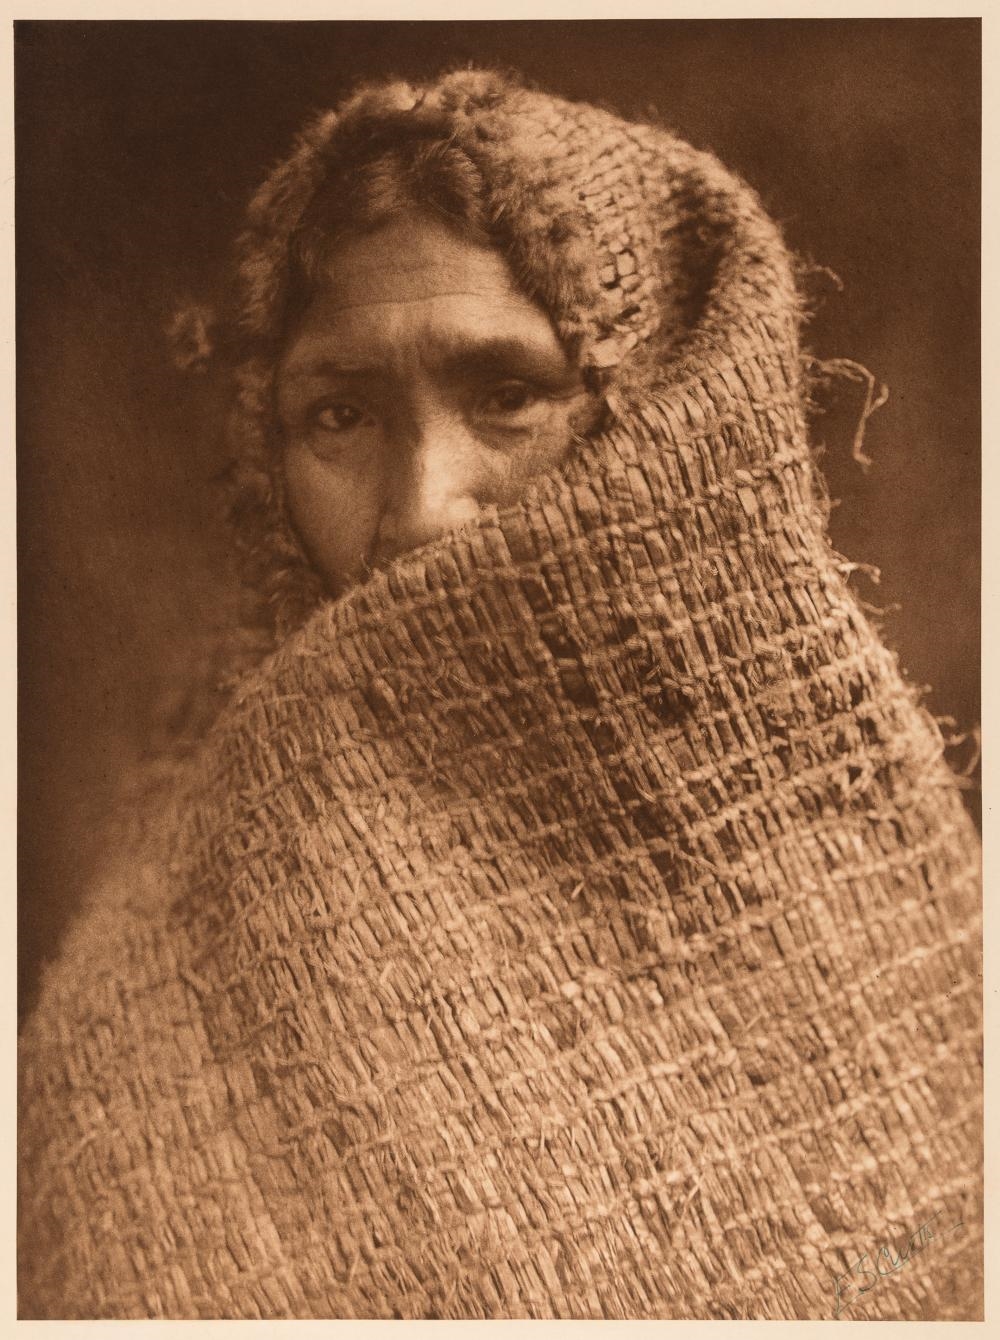 A Hesquiat Woman, 1915 by Edward S. Curtis, 1915